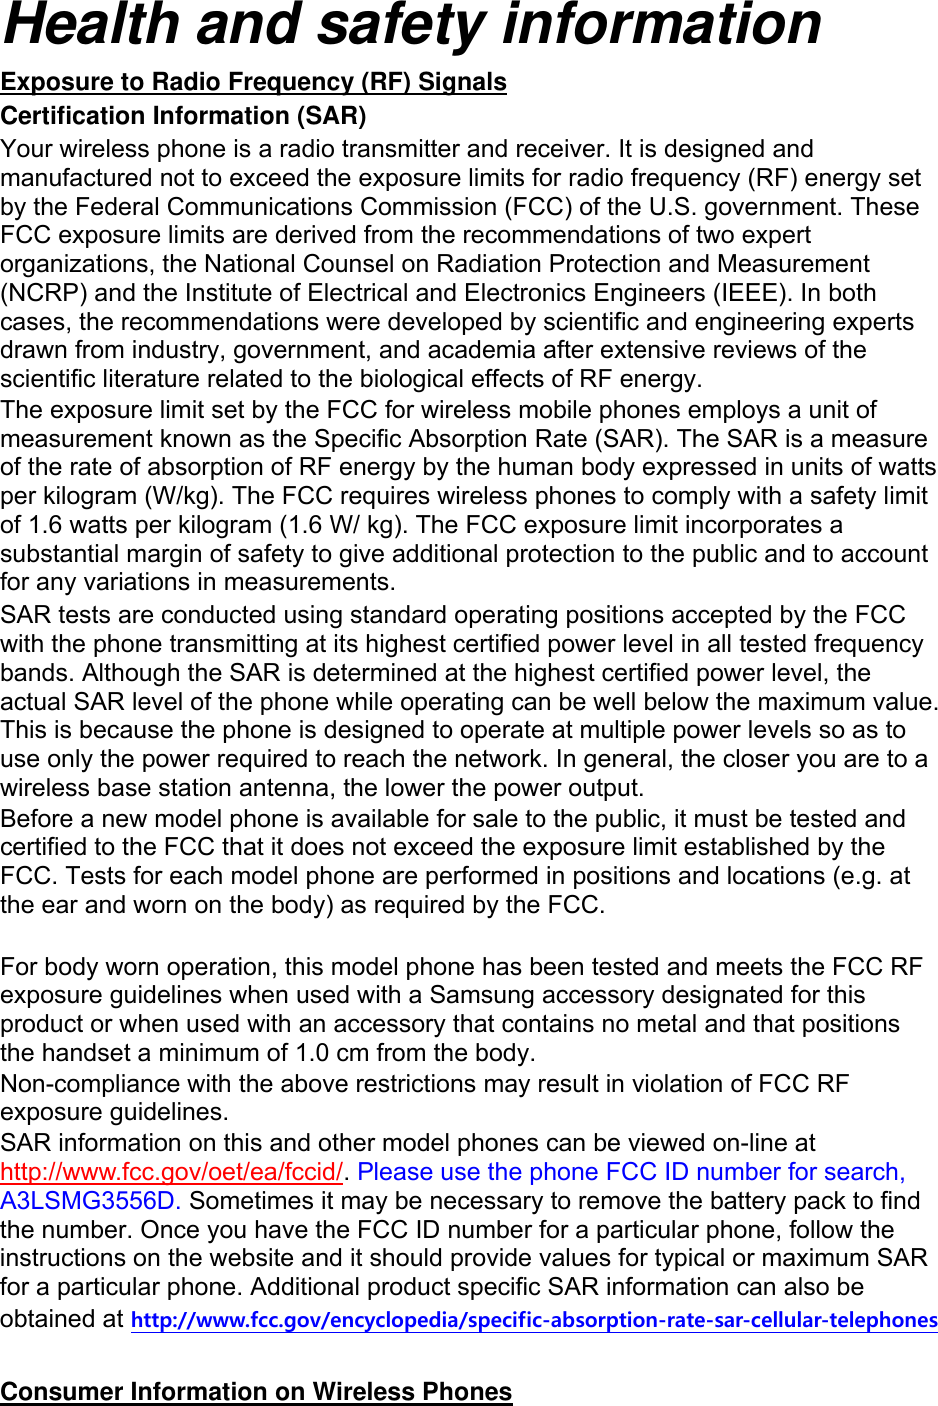 Health and safety information Exposure to Radio Frequency (RF) Signals Certification Information (SAR) Your wireless phone is a radio transmitter and receiver. It is designed and manufactured not to exceed the exposure limits for radio frequency (RF) energy set by the Federal Communications Commission (FCC) of the U.S. government. These FCC exposure limits are derived from the recommendations of two expert organizations, the National Counsel on Radiation Protection and Measurement (NCRP) and the Institute of Electrical and Electronics Engineers (IEEE). In both cases, the recommendations were developed by scientific and engineering experts drawn from industry, government, and academia after extensive reviews of the scientific literature related to the biological effects of RF energy. The exposure limit set by the FCC for wireless mobile phones employs a unit of measurement known as the Specific Absorption Rate (SAR). The SAR is a measure of the rate of absorption of RF energy by the human body expressed in units of watts per kilogram (W/kg). The FCC requires wireless phones to comply with a safety limit of 1.6 watts per kilogram (1.6 W/ kg). The FCC exposure limit incorporates a substantial margin of safety to give additional protection to the public and to account for any variations in measurements. SAR tests are conducted using standard operating positions accepted by the FCC with the phone transmitting at its highest certified power level in all tested frequency bands. Although the SAR is determined at the highest certified power level, the actual SAR level of the phone while operating can be well below the maximum value. This is because the phone is designed to operate at multiple power levels so as to use only the power required to reach the network. In general, the closer you are to a wireless base station antenna, the lower the power output. Before a new model phone is available for sale to the public, it must be tested and certified to the FCC that it does not exceed the exposure limit established by the FCC. Tests for each model phone are performed in positions and locations (e.g. at the ear and worn on the body) as required by the FCC.      For body worn operation, this model phone has been tested and meets the FCC RF exposure guidelines when used with a Samsung accessory designated for this product or when used with an accessory that contains no metal and that positions the handset a minimum of 1.0 cm from the body.   Non-compliance with the above restrictions may result in violation of FCC RF exposure guidelines. SAR information on this and other model phones can be viewed on-line at http://www.fcc.gov/oet/ea/fccid/. Please use the phone FCC ID number for search, A3LSMG3556D. Sometimes it may be necessary to remove the battery pack to find the number. Once you have the FCC ID number for a particular phone, follow the instructions on the website and it should provide values for typical or maximum SAR for a particular phone. Additional product specific SAR information can also be obtained at http://www.fcc.gov/encyclopedia/specific-absorption-rate-sar-cellular-telephones  Consumer Information on Wireless Phones 